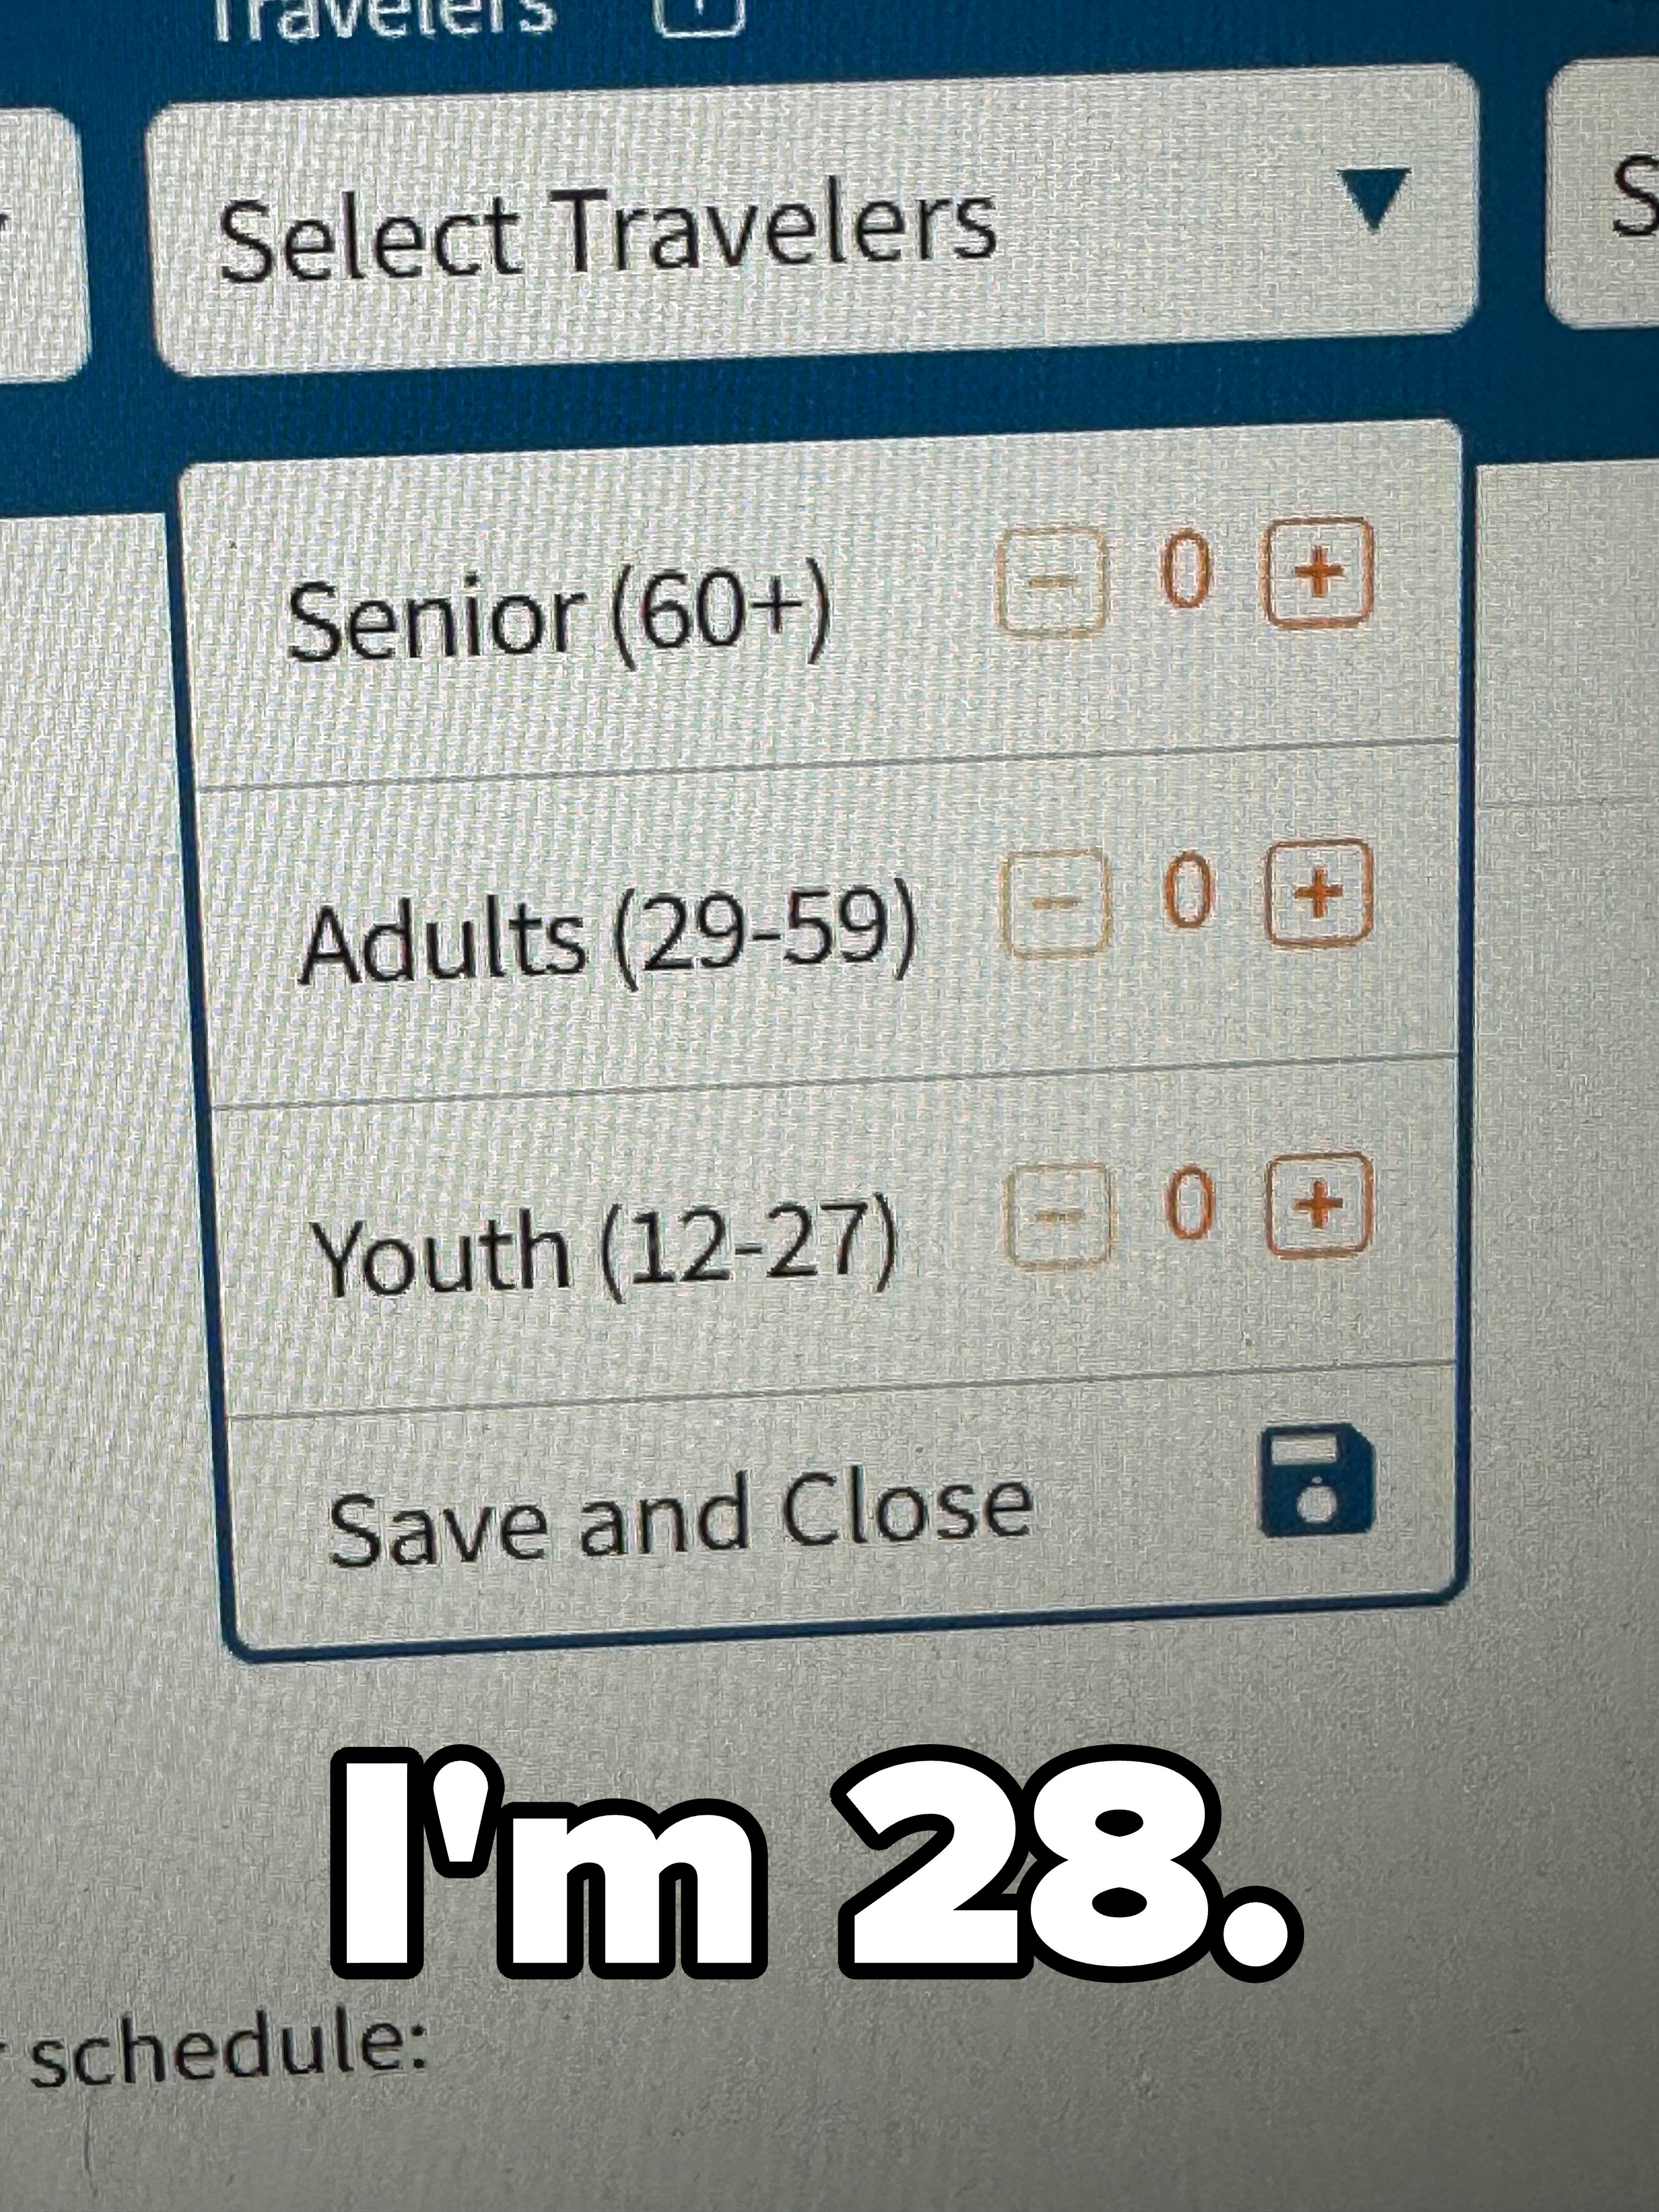 28-year-old notices that their age isn&#x27;t an option in the online age-selection tool